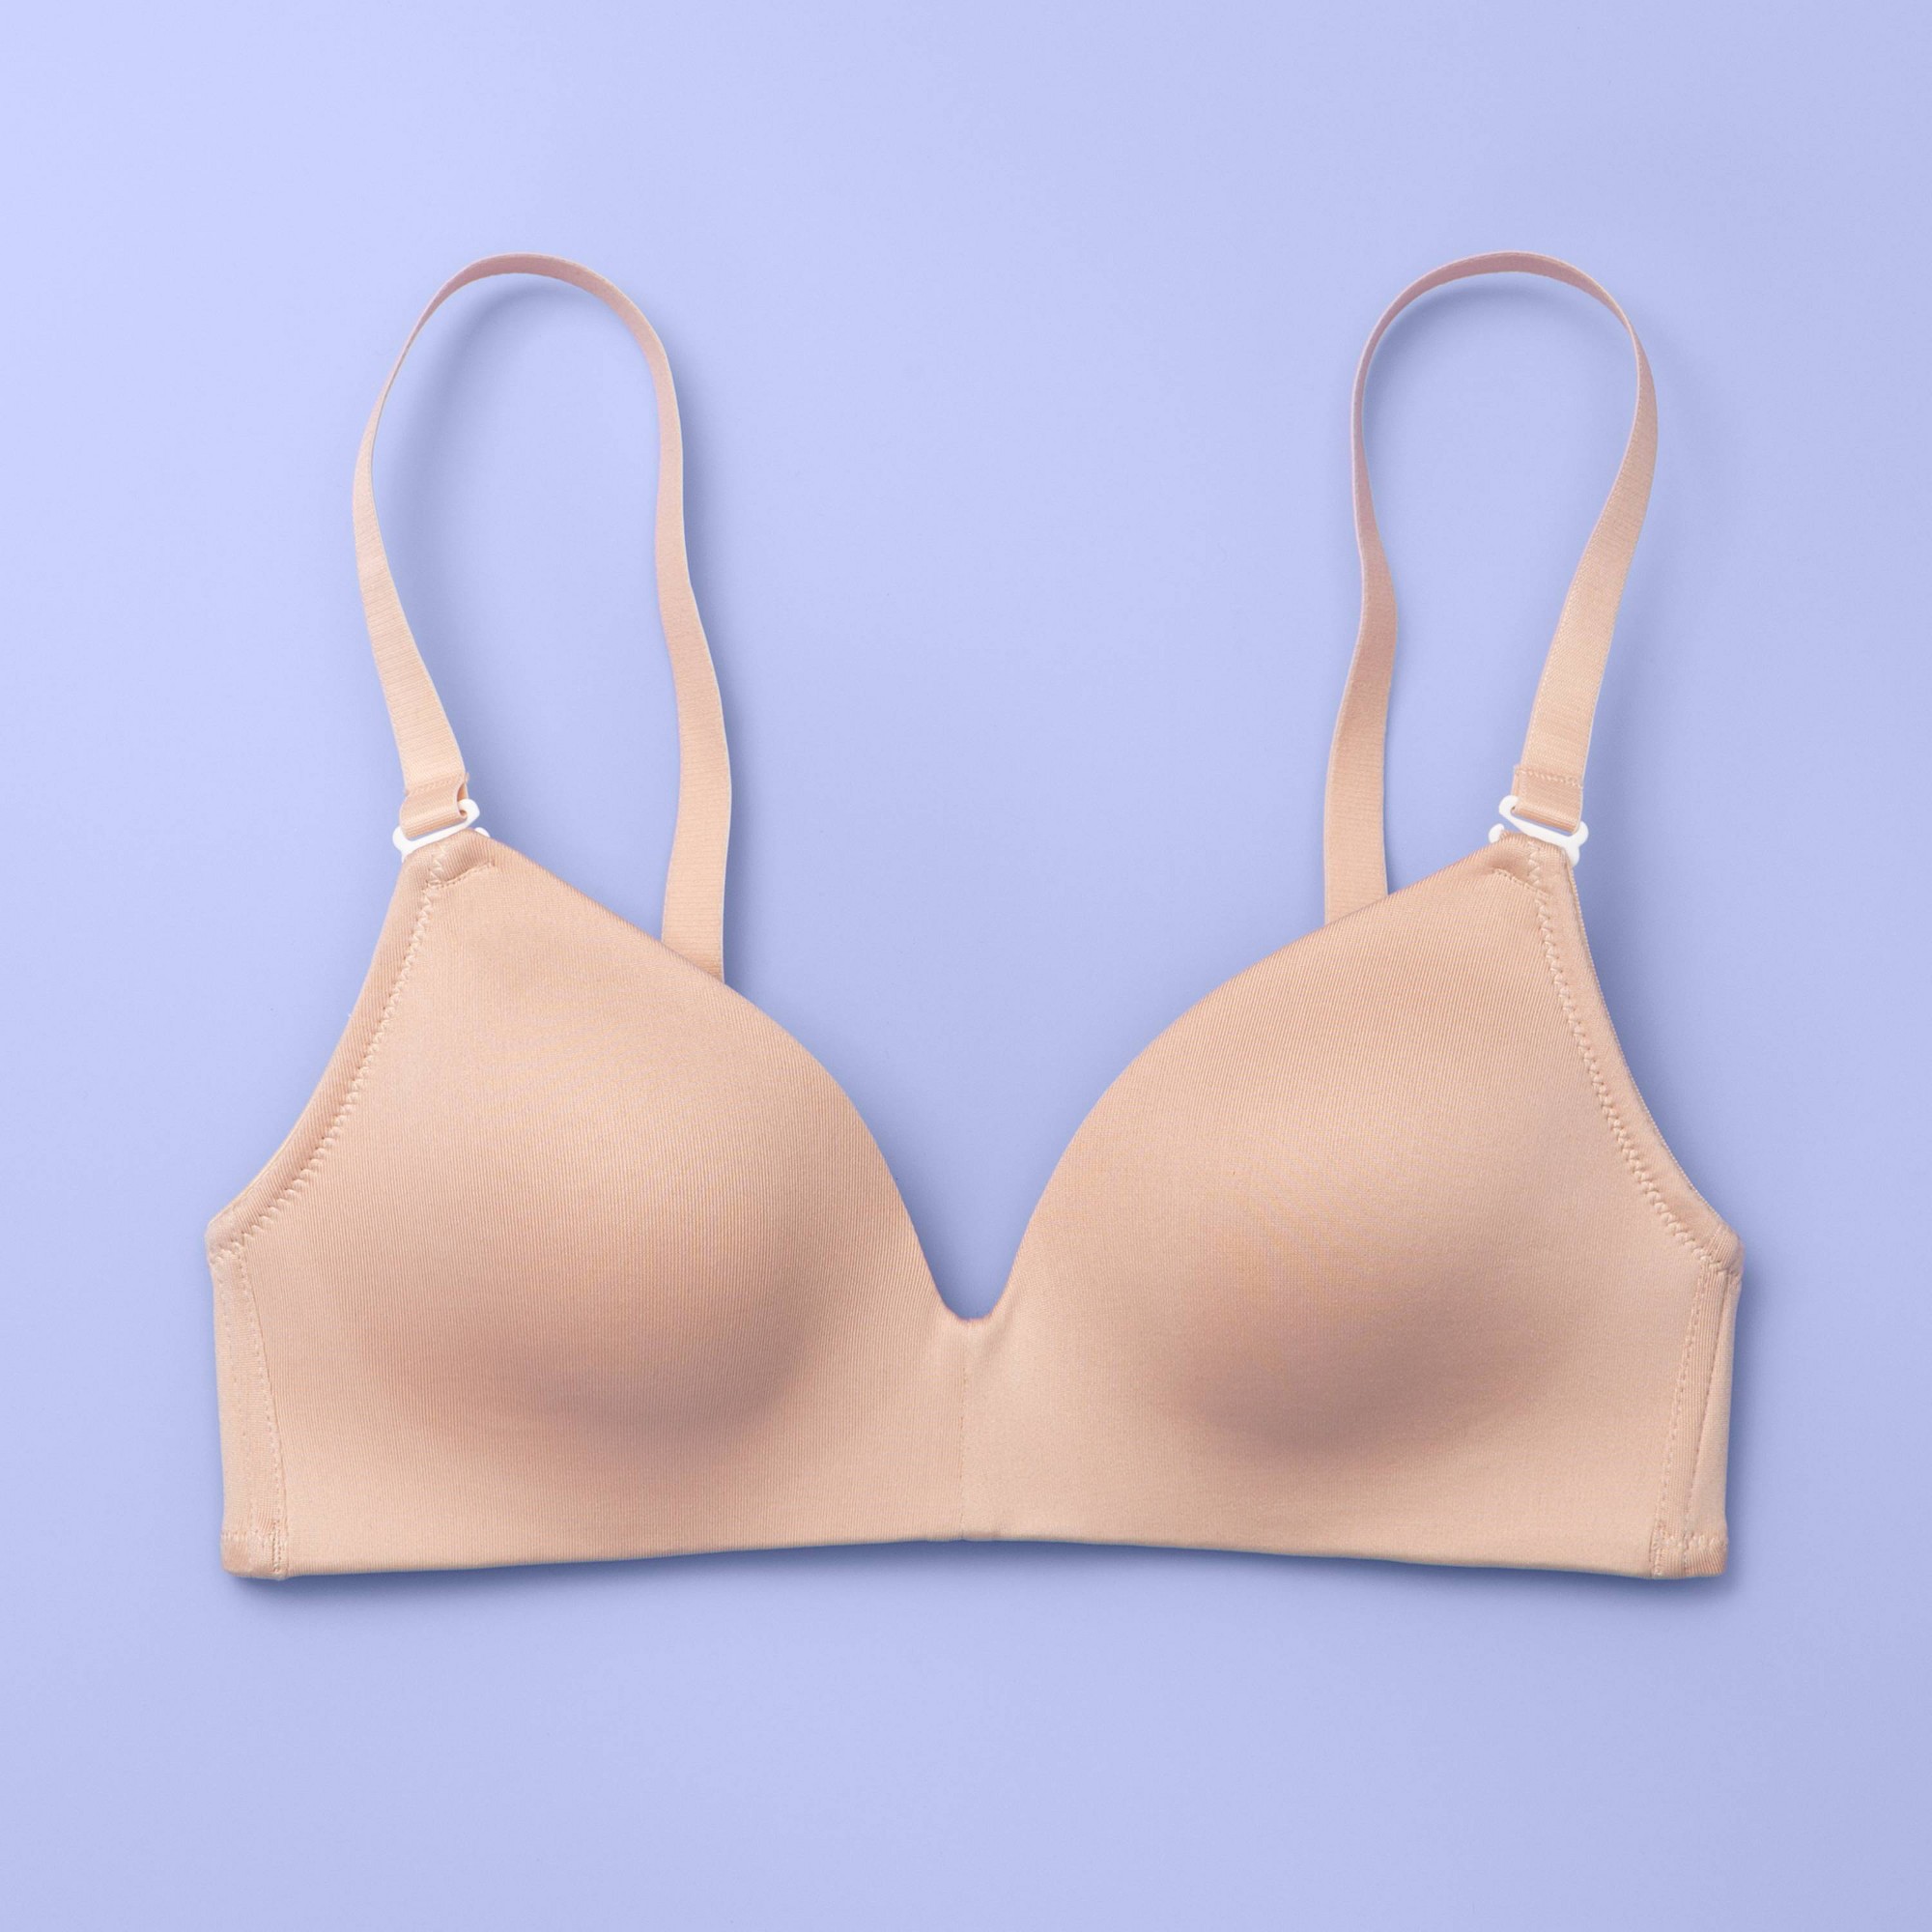 Girls' Molded Bra - More Than Magic Beige 36A, Girl's, by More than Magic